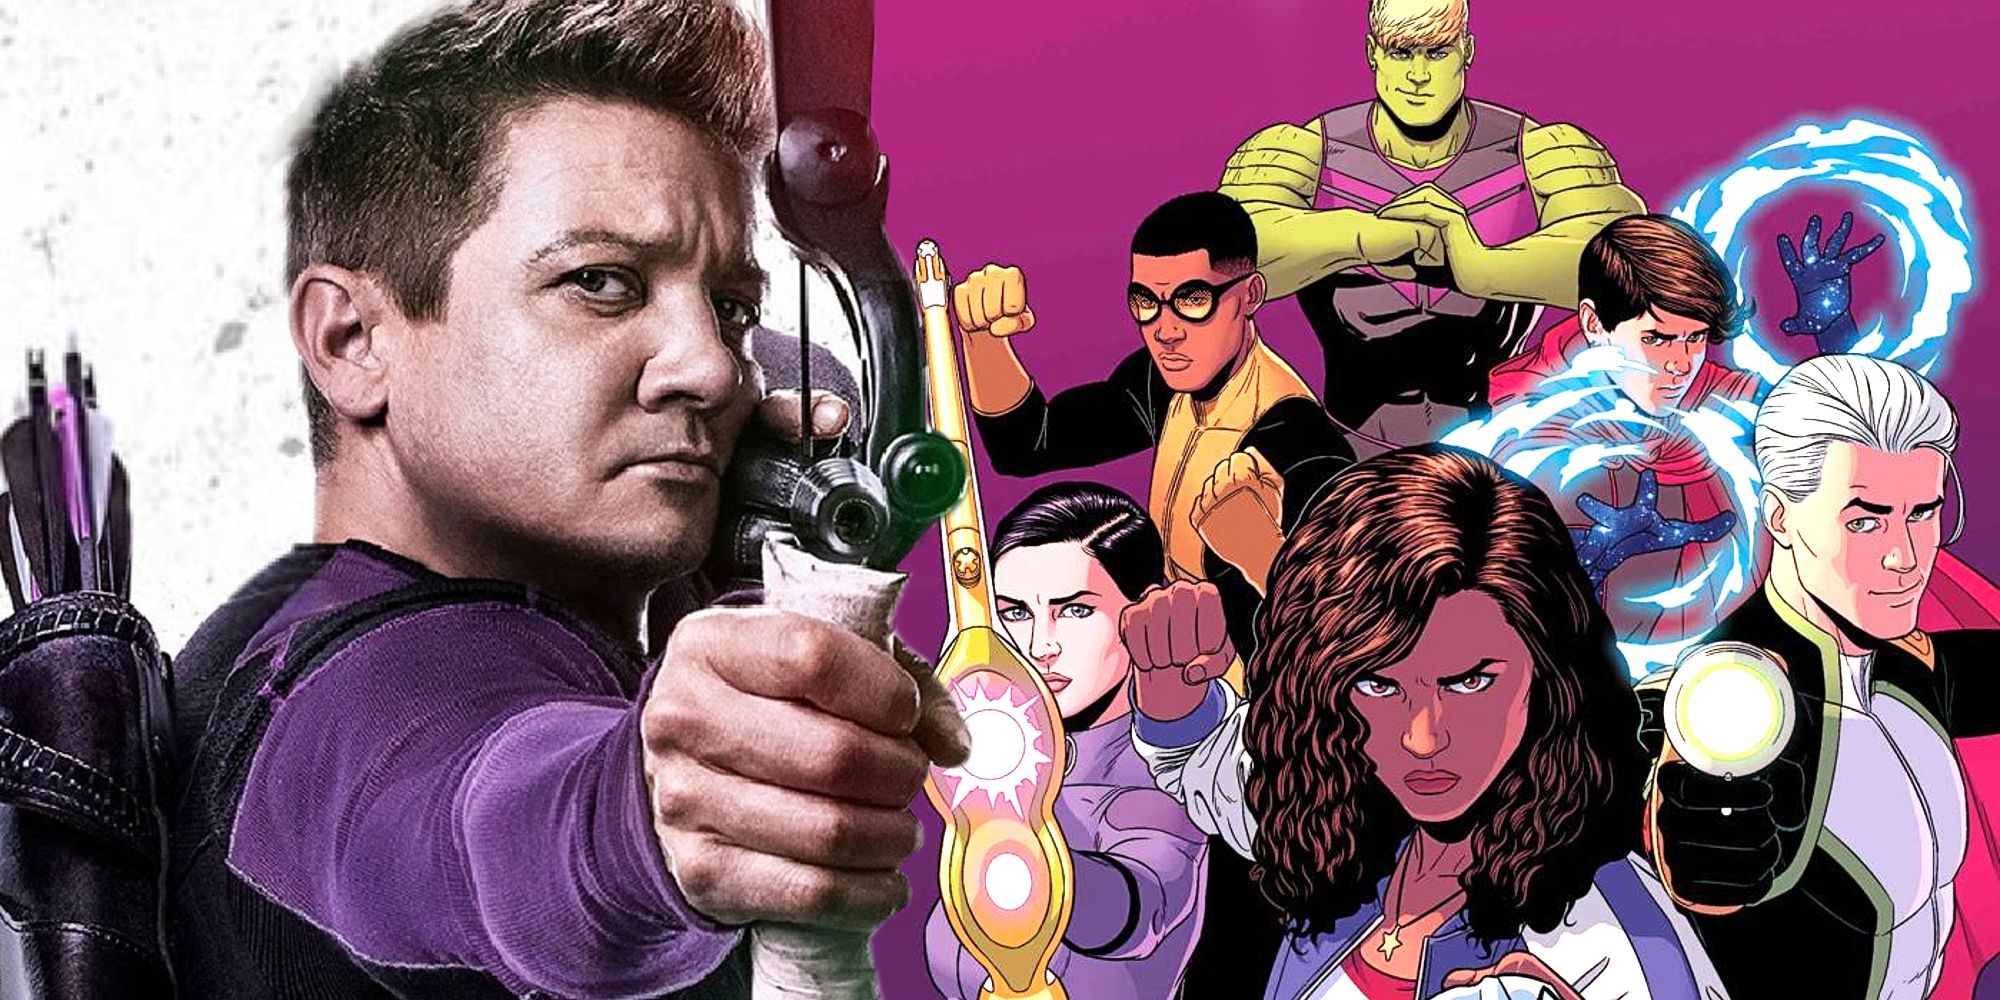 Hawkeye’s Best Future Is As Young Avengers’ Leader (With Laura)